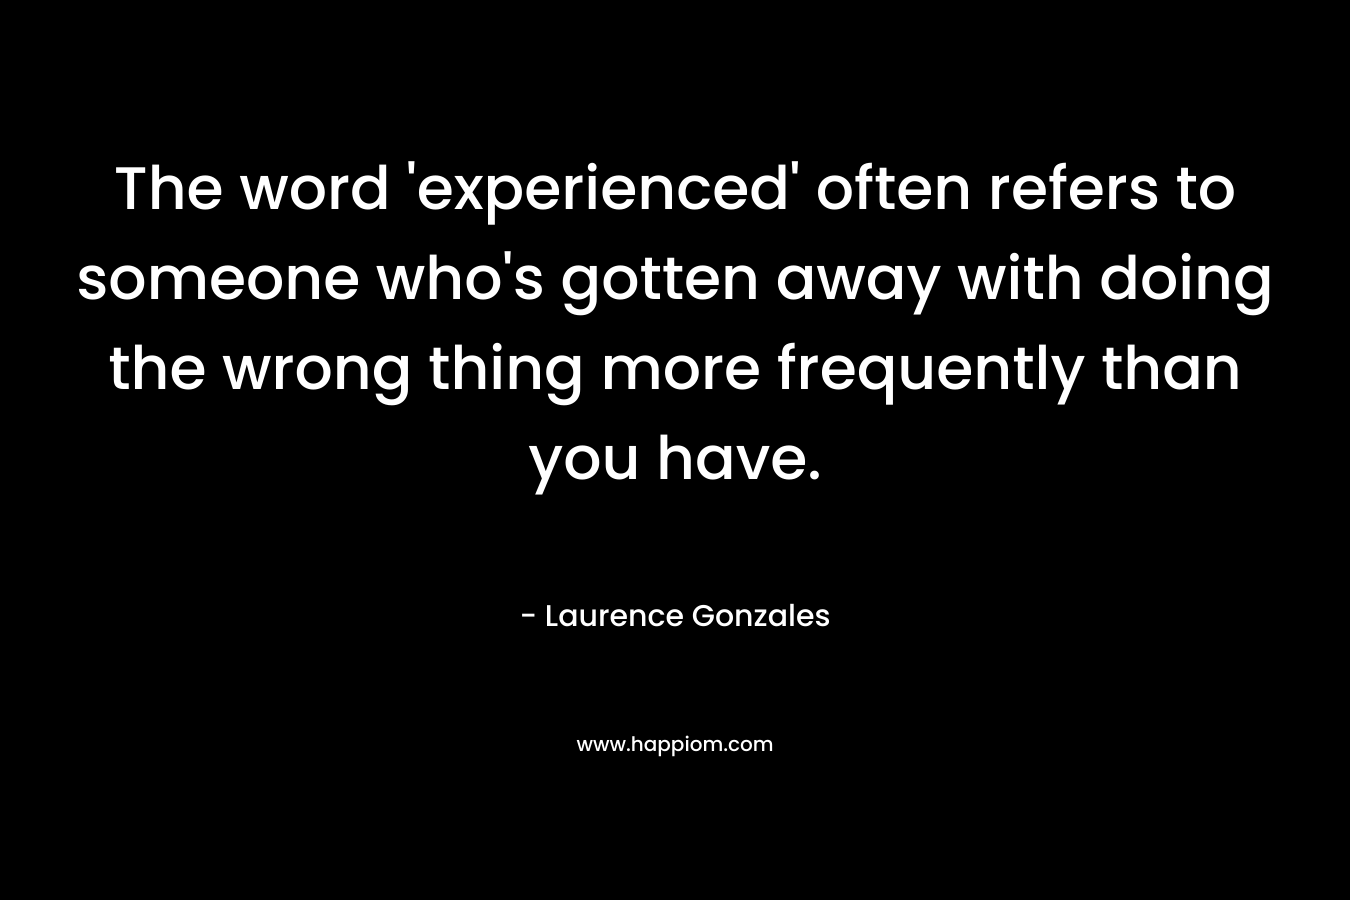 The word ‘experienced’ often refers to someone who’s gotten away with doing the wrong thing more frequently than you have. – Laurence Gonzales